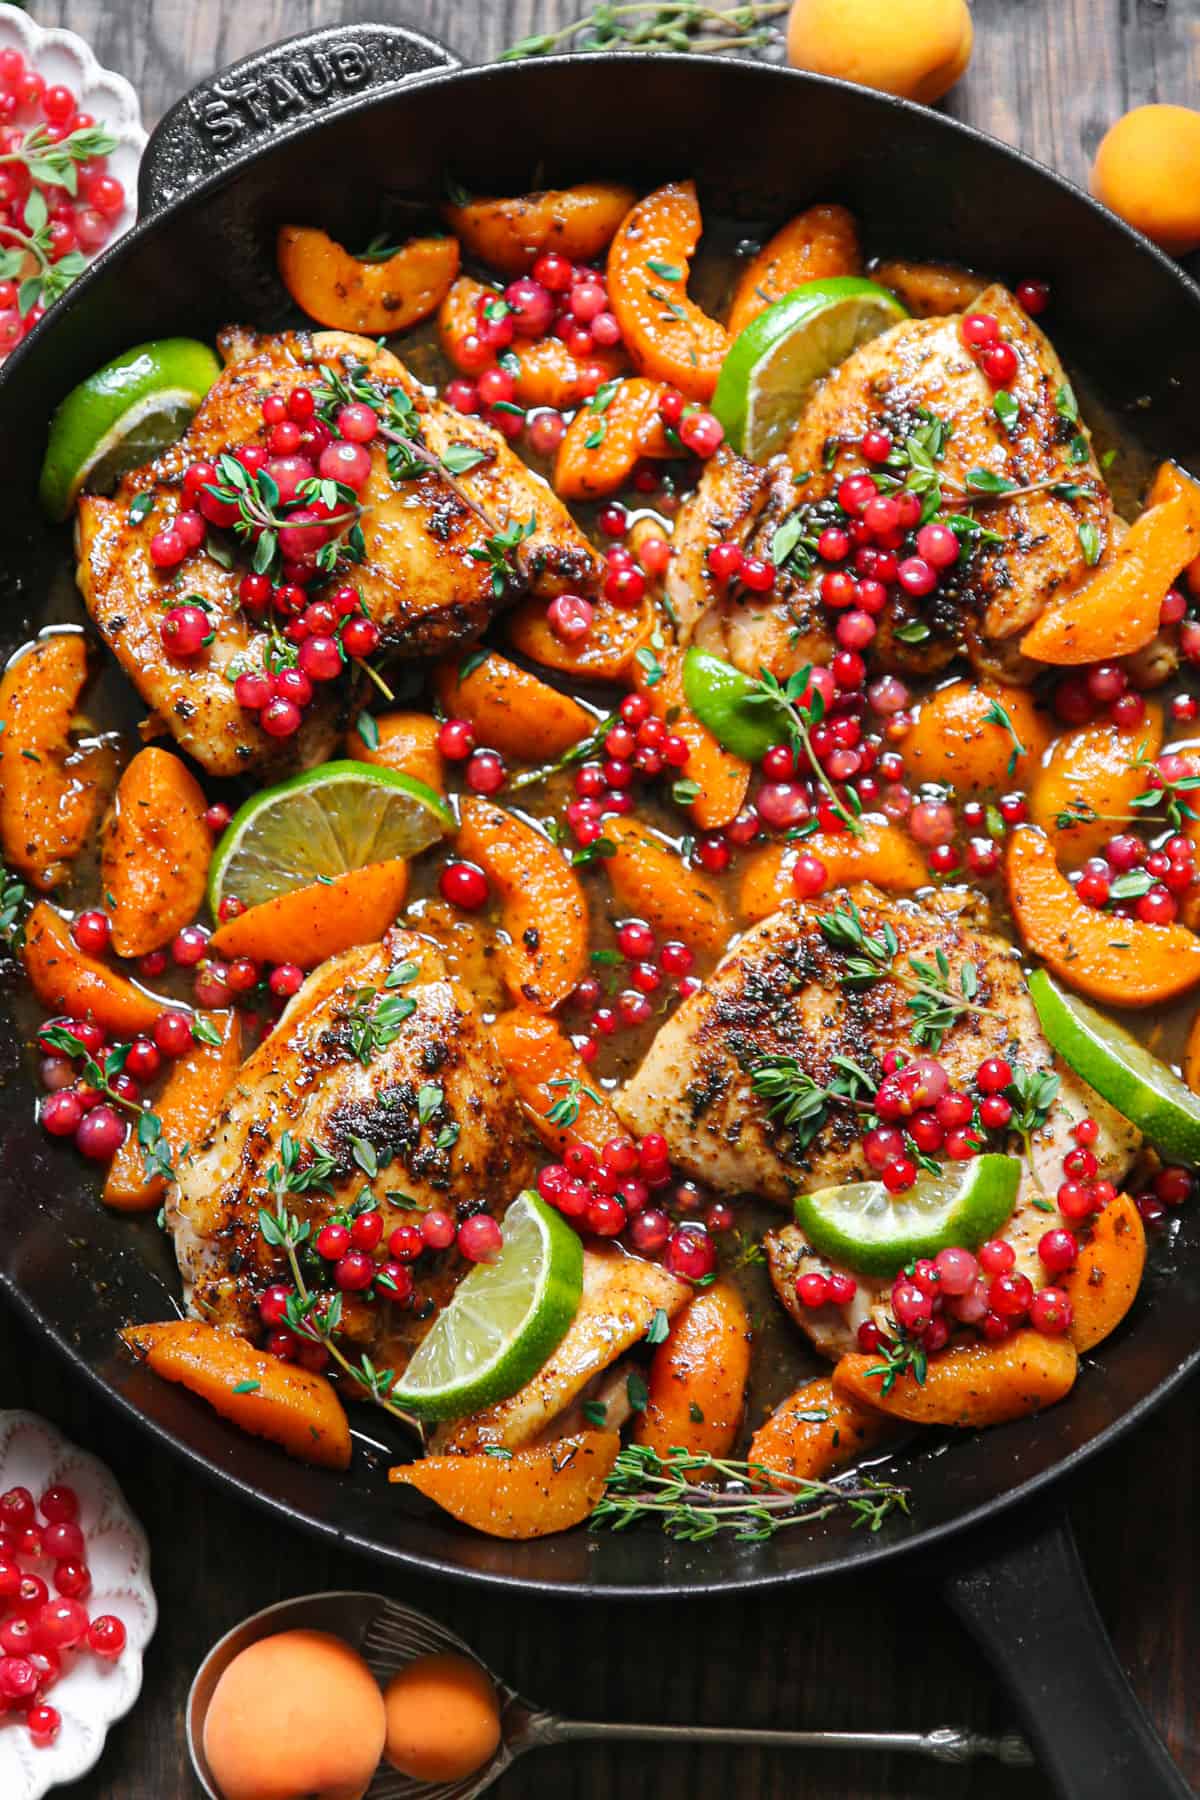 Seared Chicken Thighs with Red Currants, Apricots, Honey-Lime Sauce, garnished with lime slices - in a cast iron skillet.